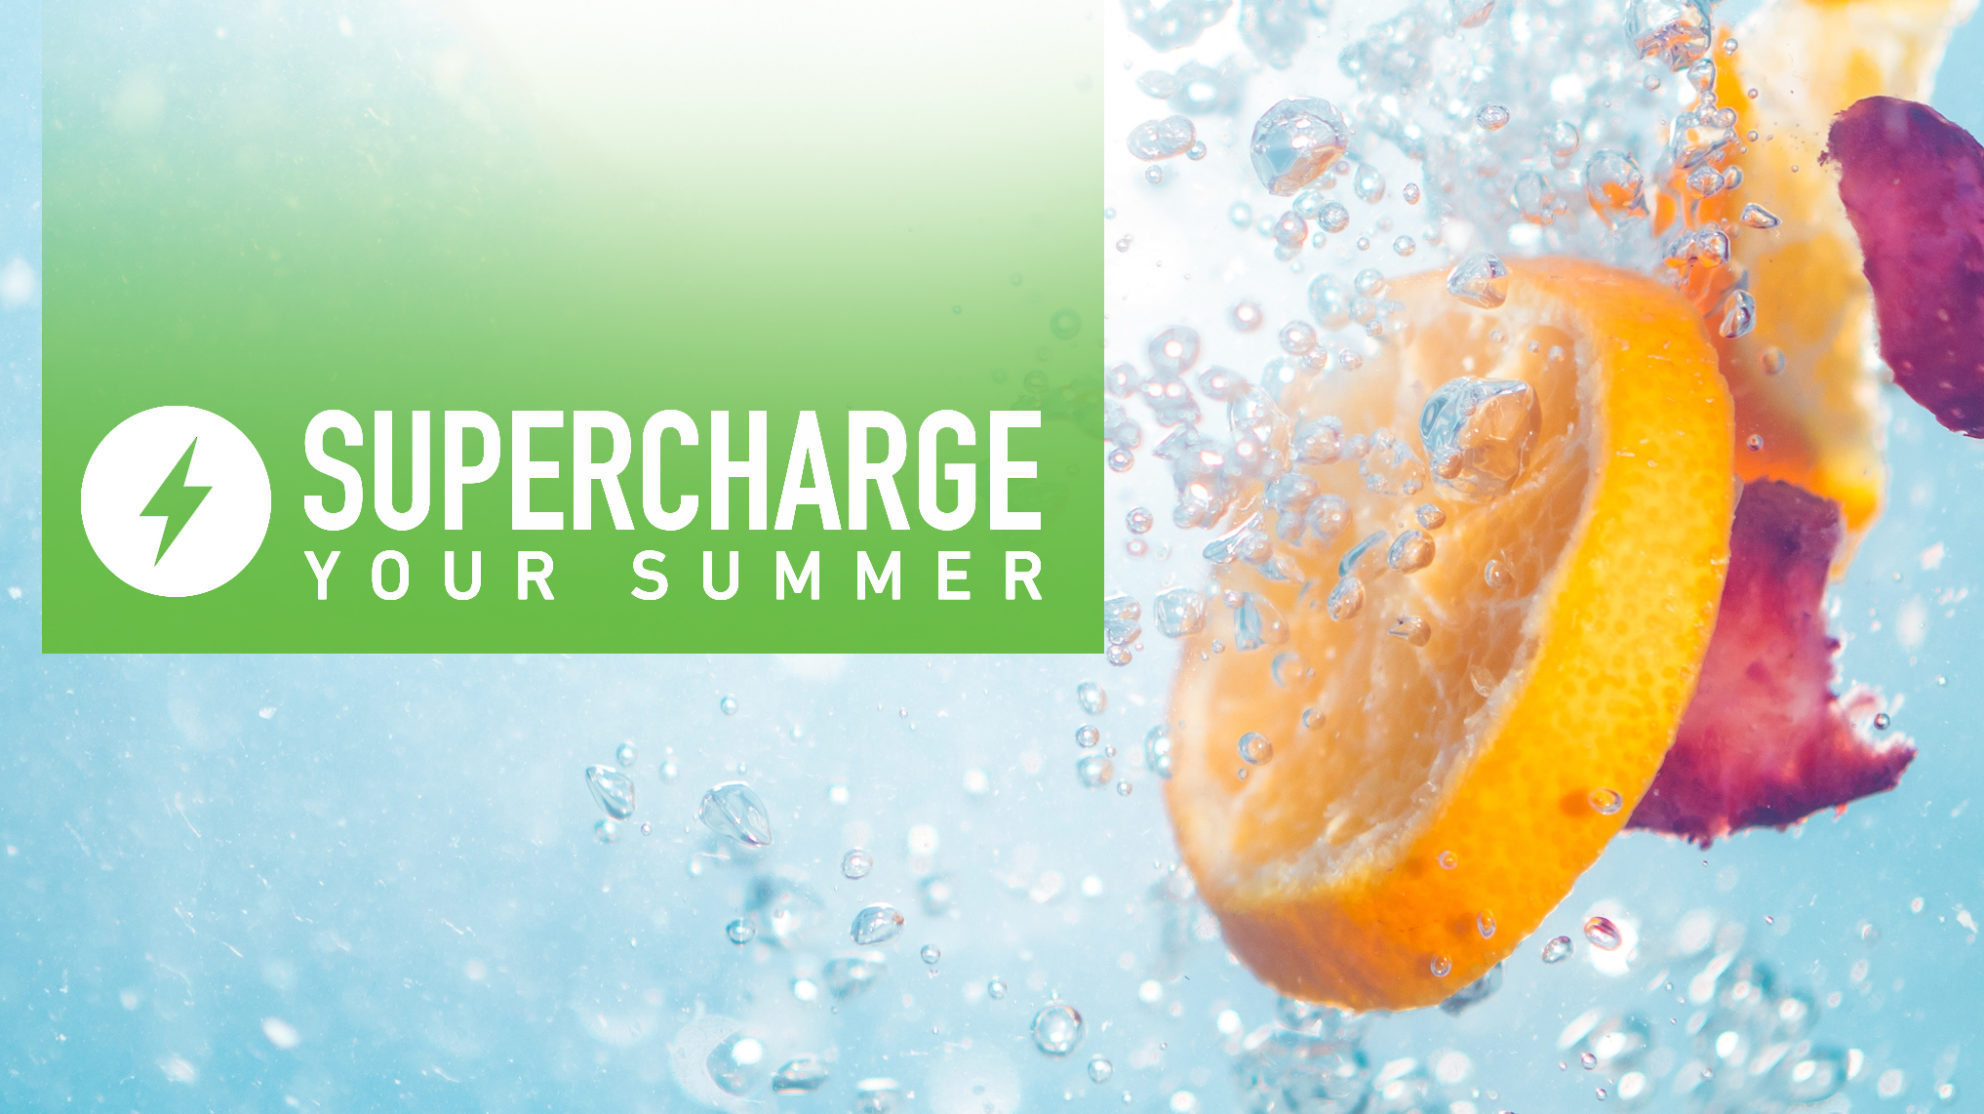 Industry Tips to Supercharge Your Summer